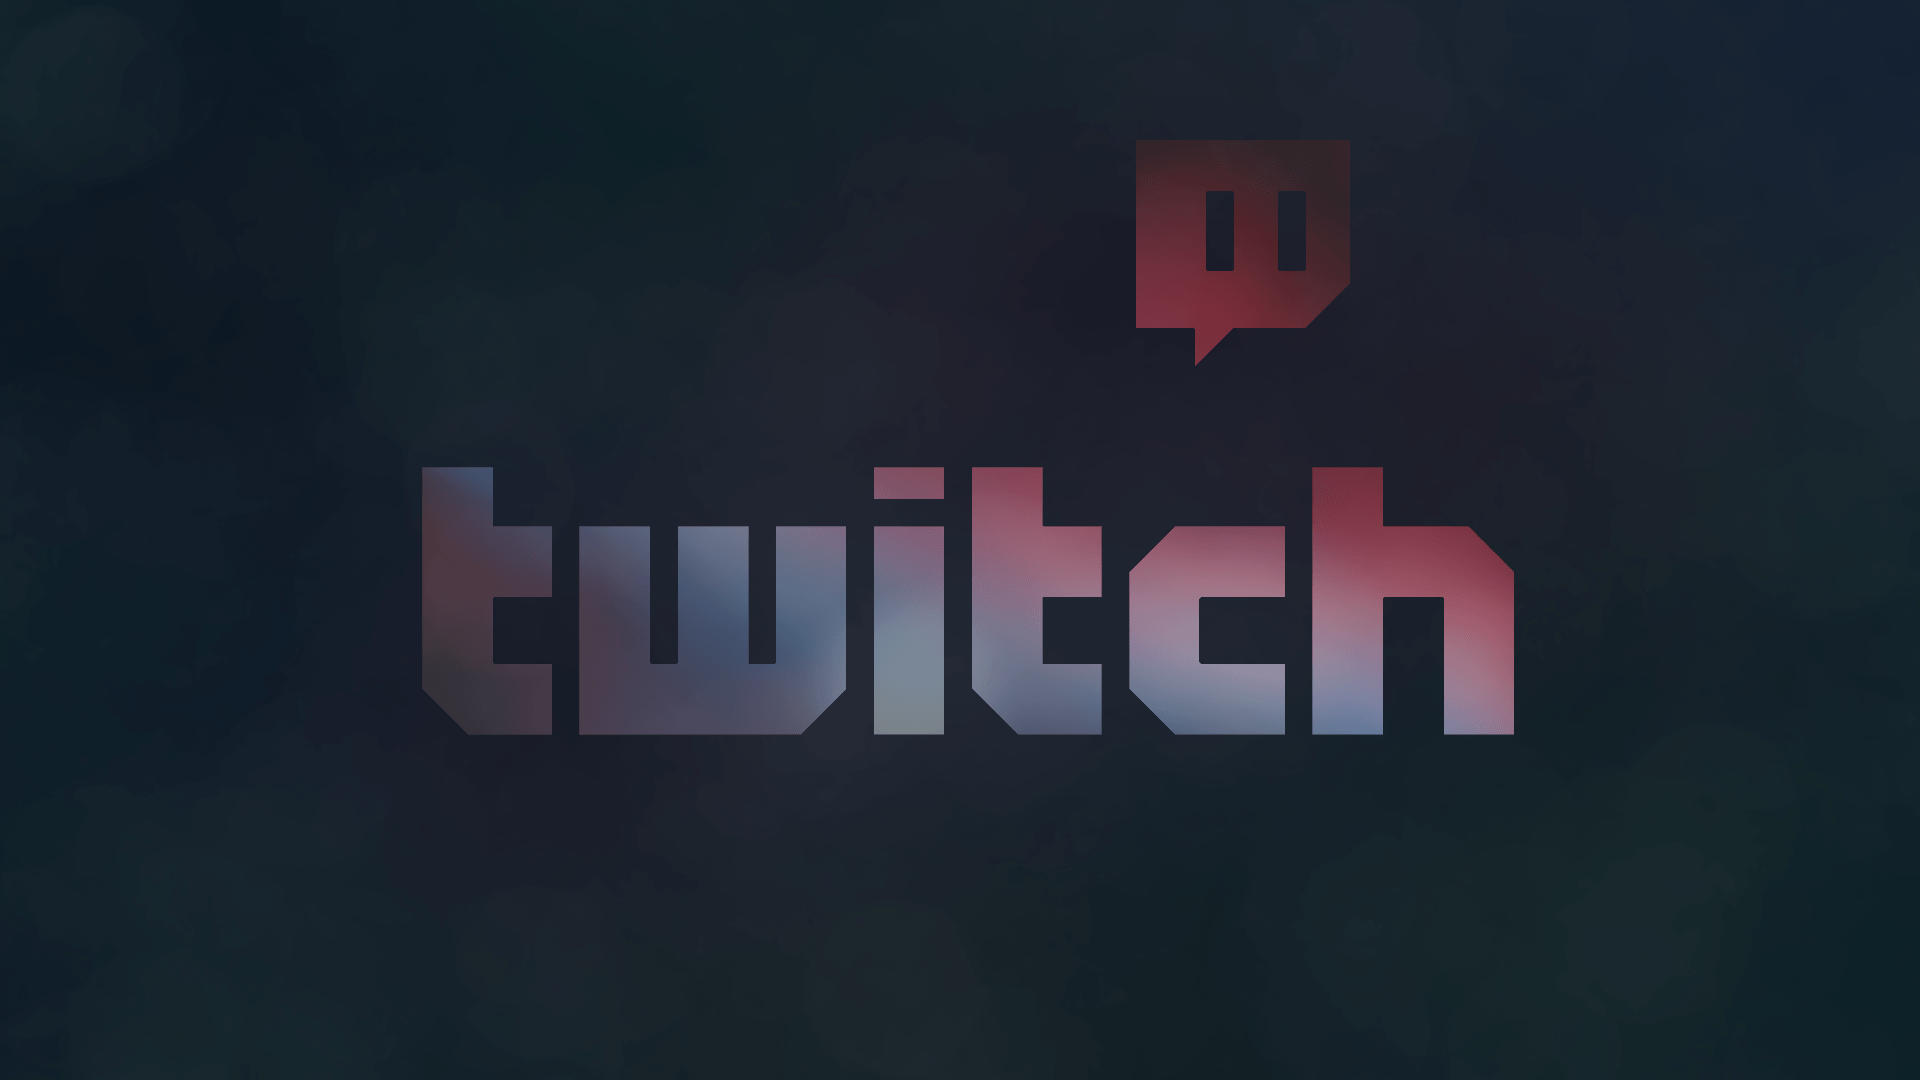 Awesome Twitch Wallpaper Free Awesome Twitch Background